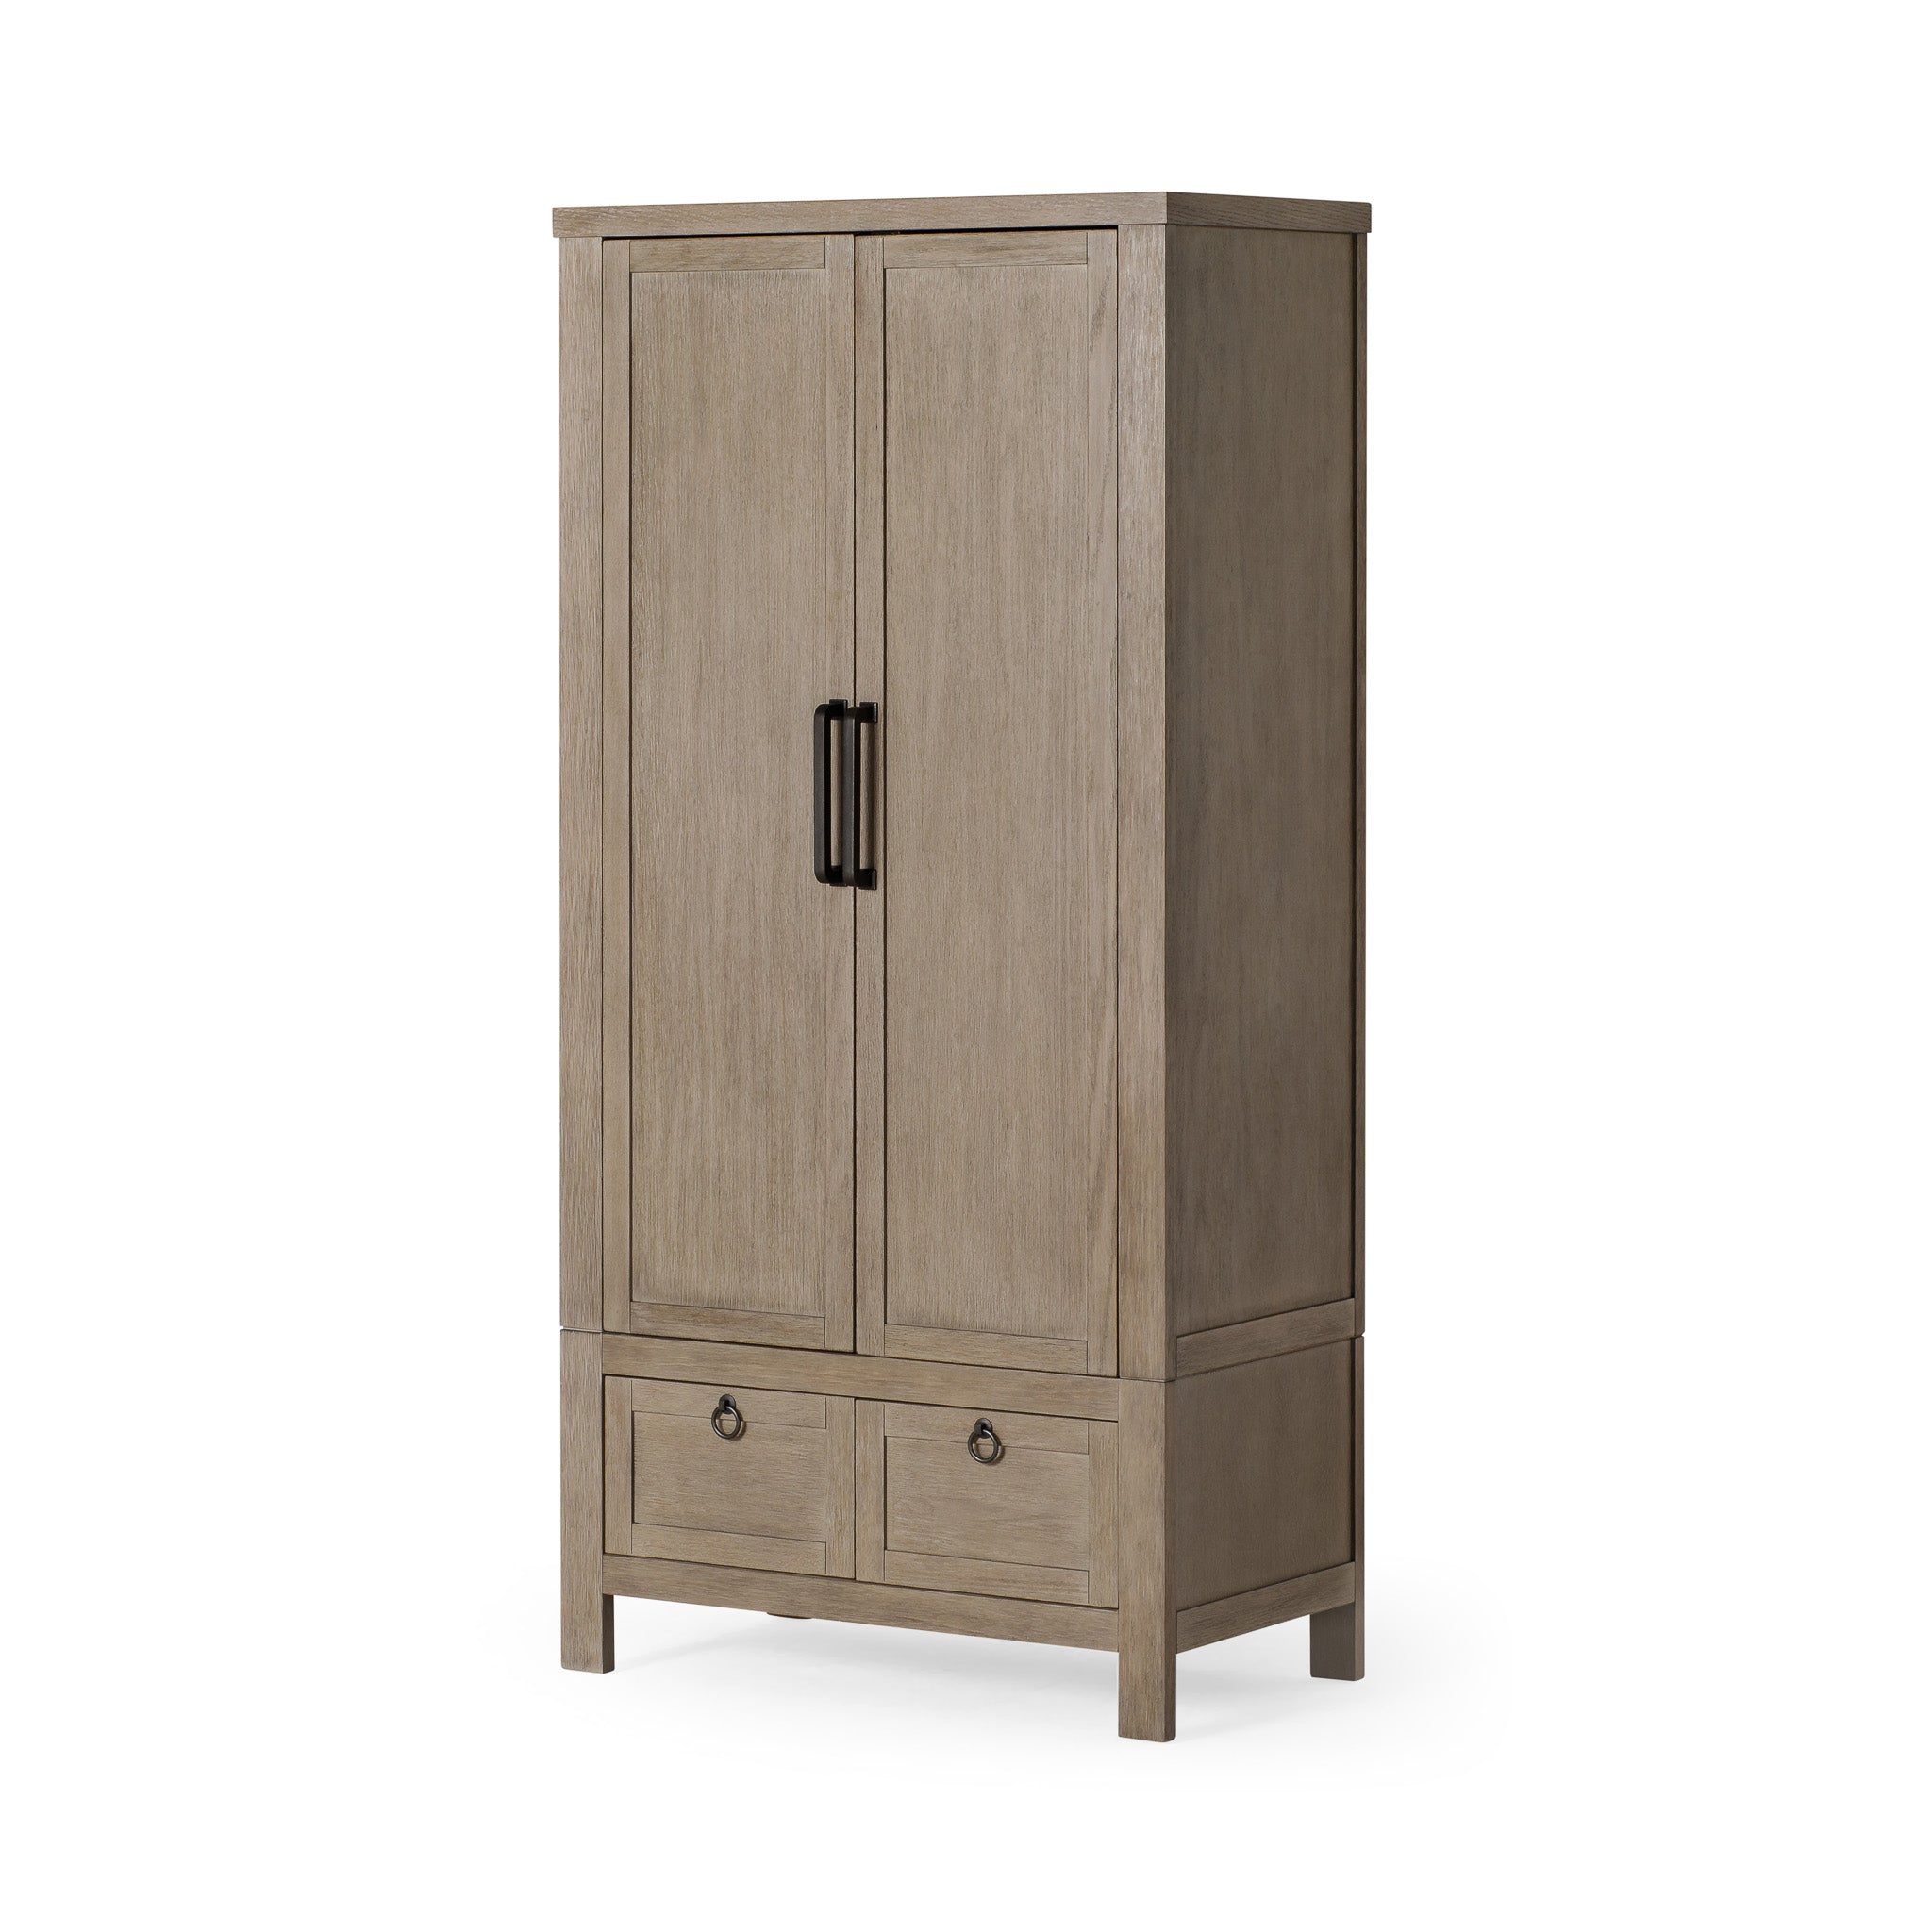 Vaughn Organic Wooden Cabinet in Weathered Grey Finish in Cabinets by Maven Lane